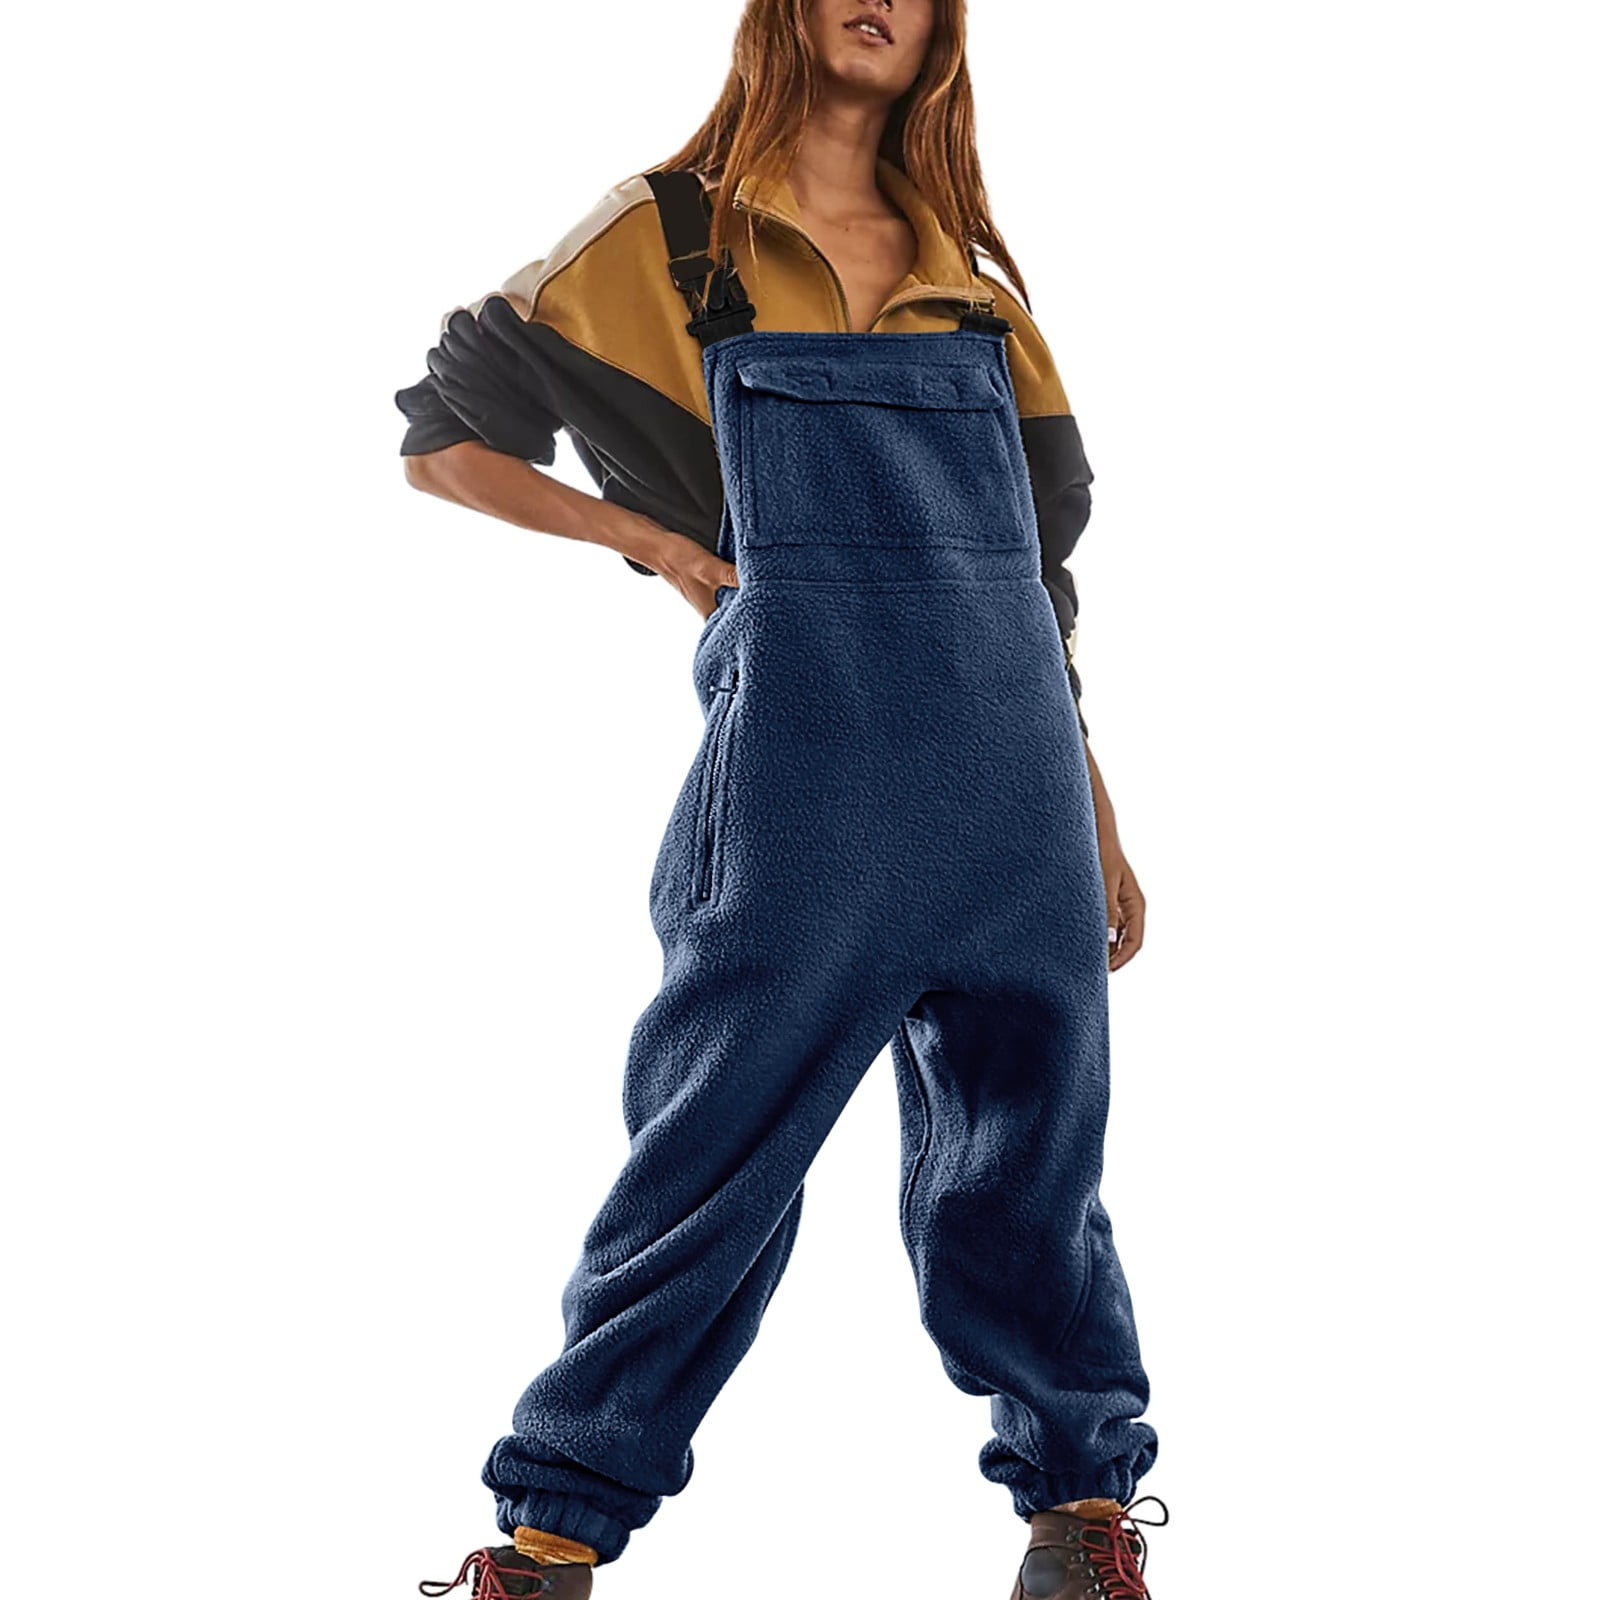 Replying to @mel_tagle  fleece overalls? Yay or nay? #midweststy